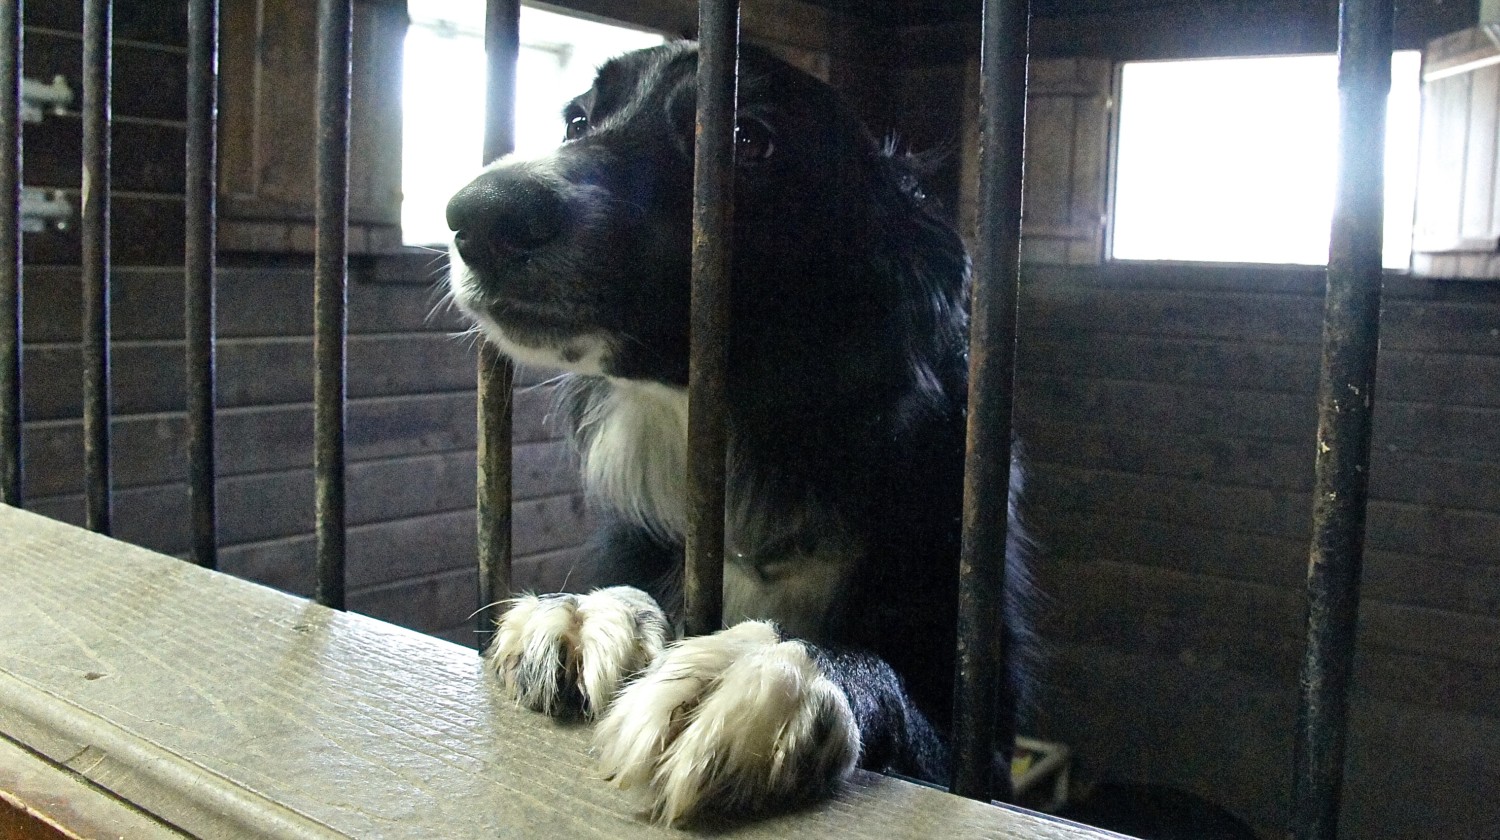 Border Collie dog looking out from behind bars